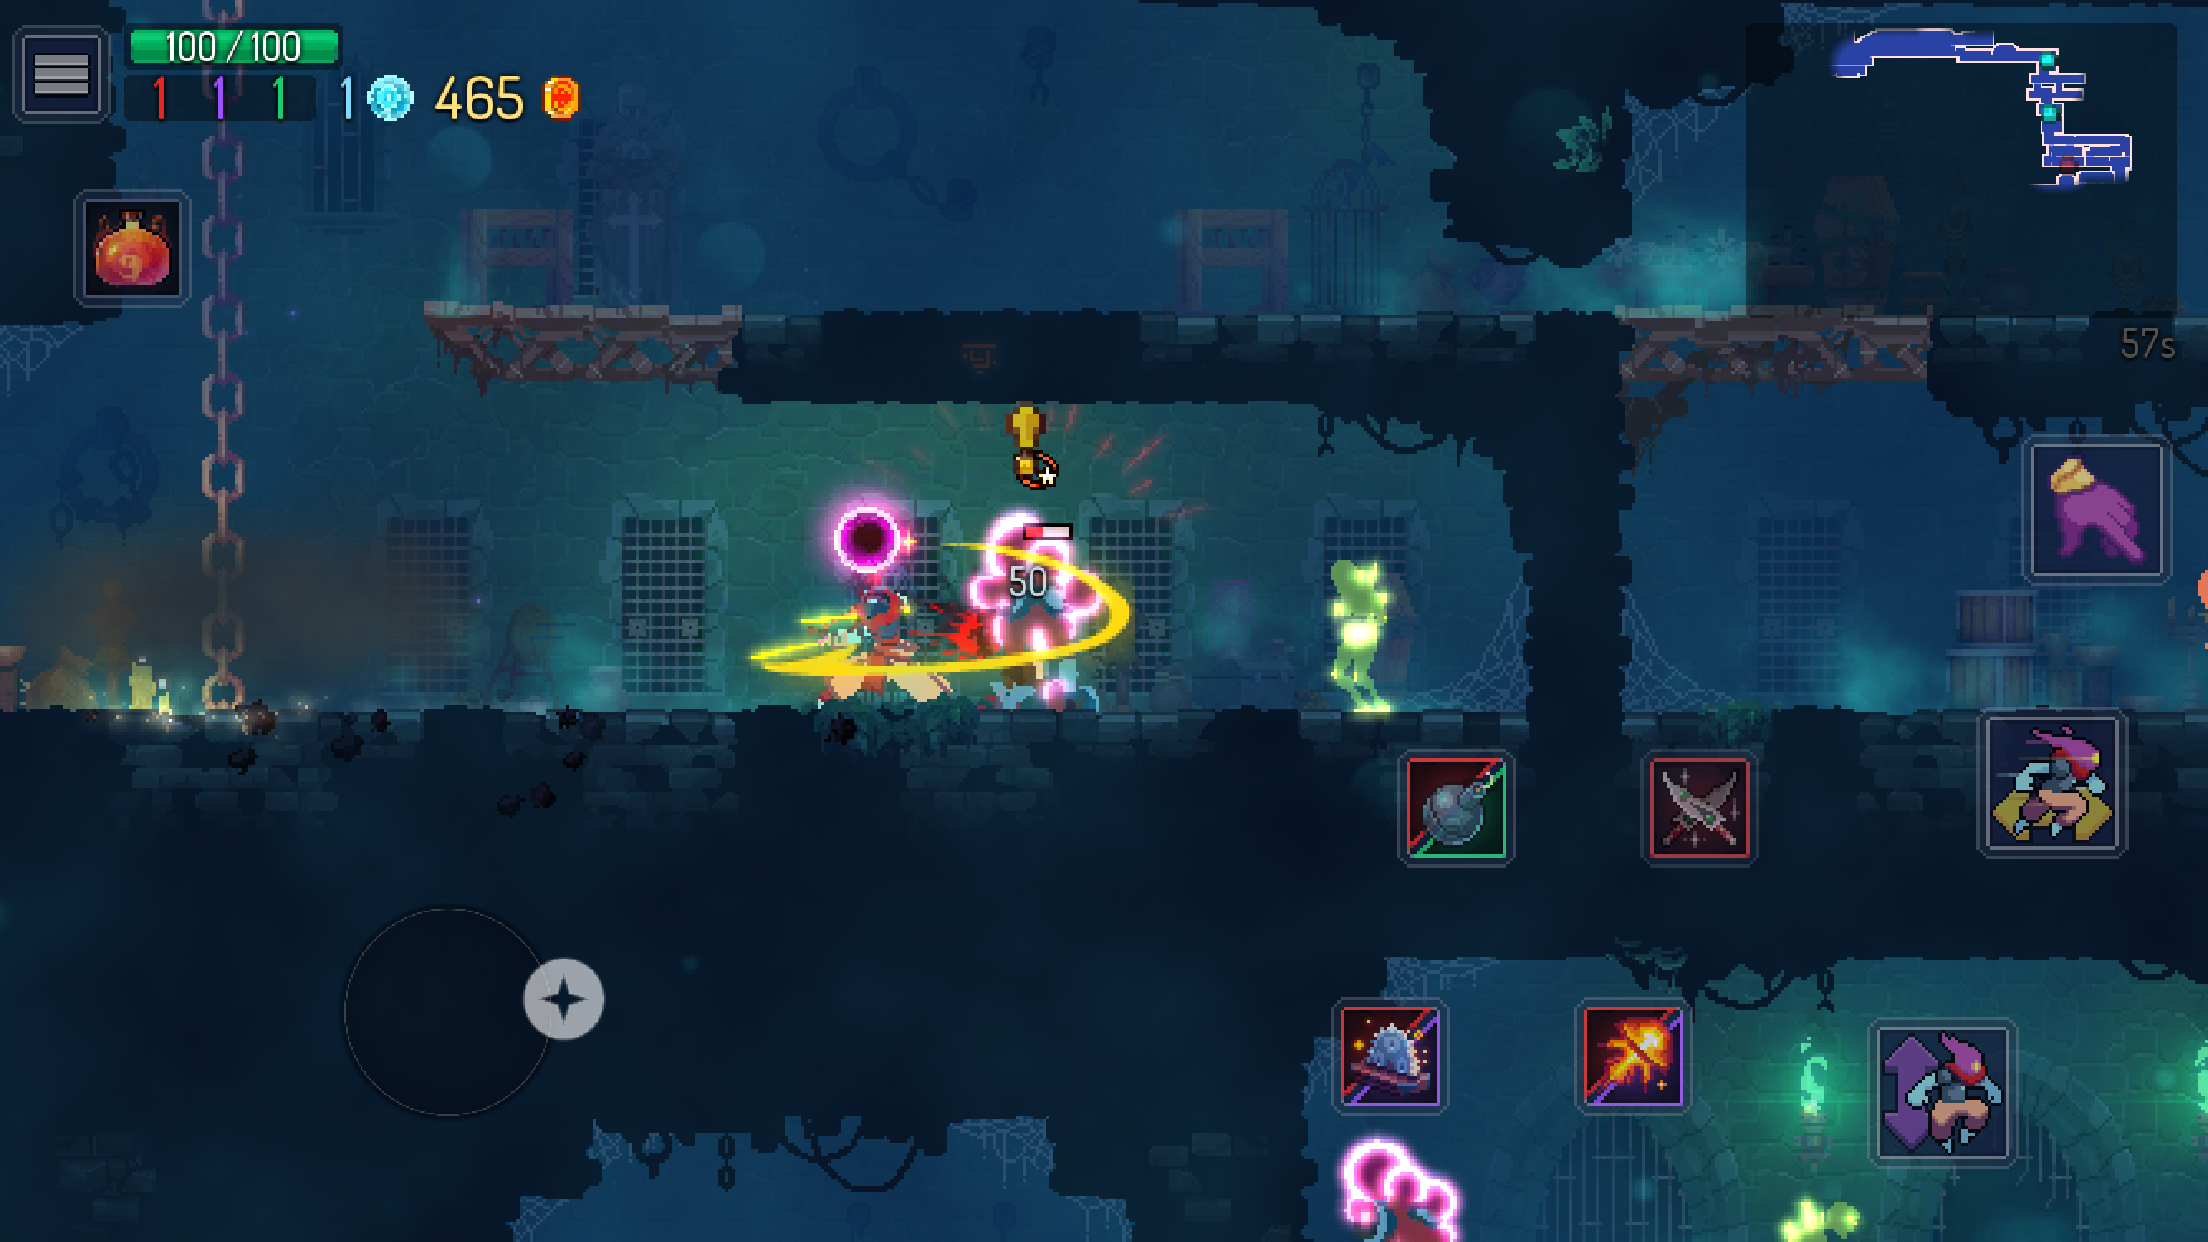 dead cells android,dead cells android gameplay,dead cells,dead cells gameplay,dead cells mobile,dead cells ios,android,dead cells game,cells,dead cells android download,dead cells pc,dead cells review,dead cells trailer,dead cells mobile apk,dead cells apk,dead cells guide,dead cells ost,dead cells mod,dead cells android full,dead cells android free,dead cells tips,dead cells hack,dead cells speedrun,gratis dead cells android,dead cells android review,dead cells mobile android,android games